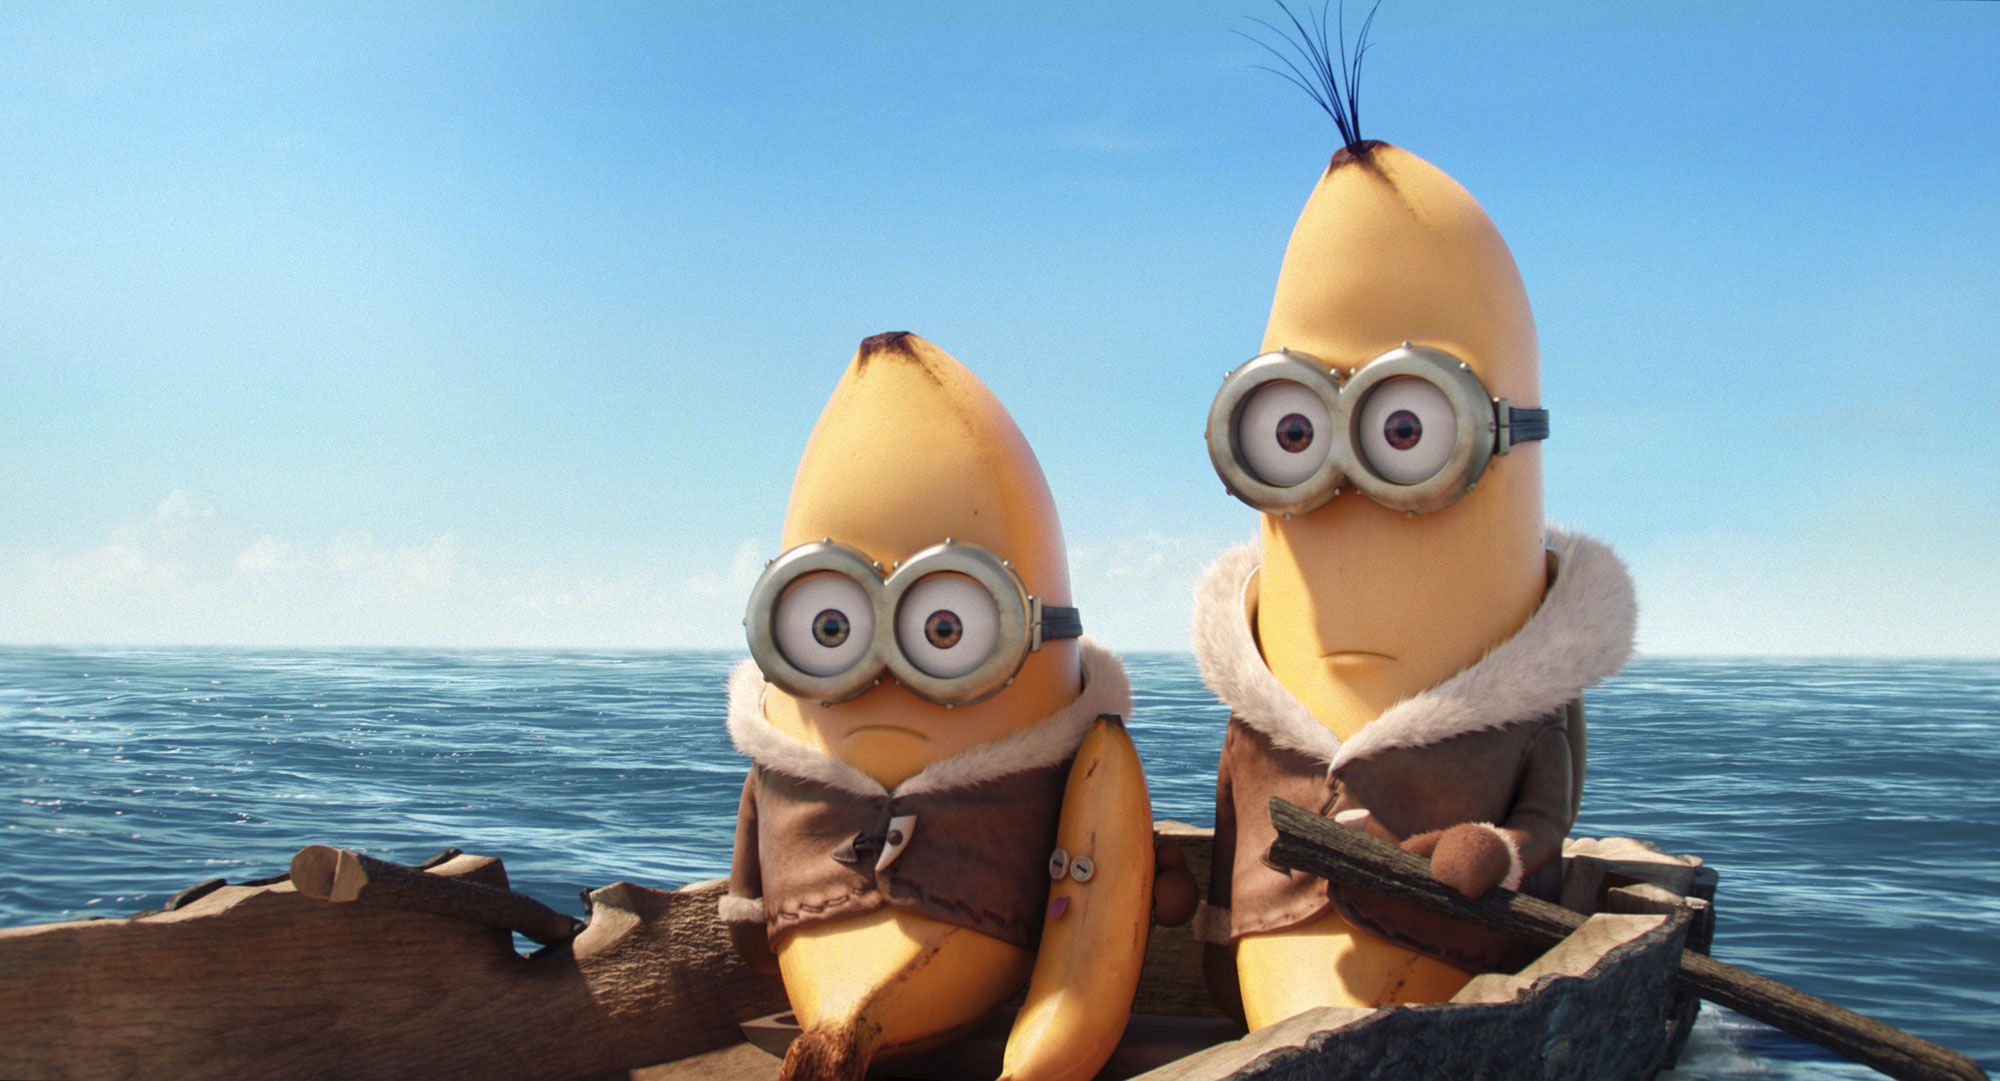 Minions: 2nd highest grossing animated film